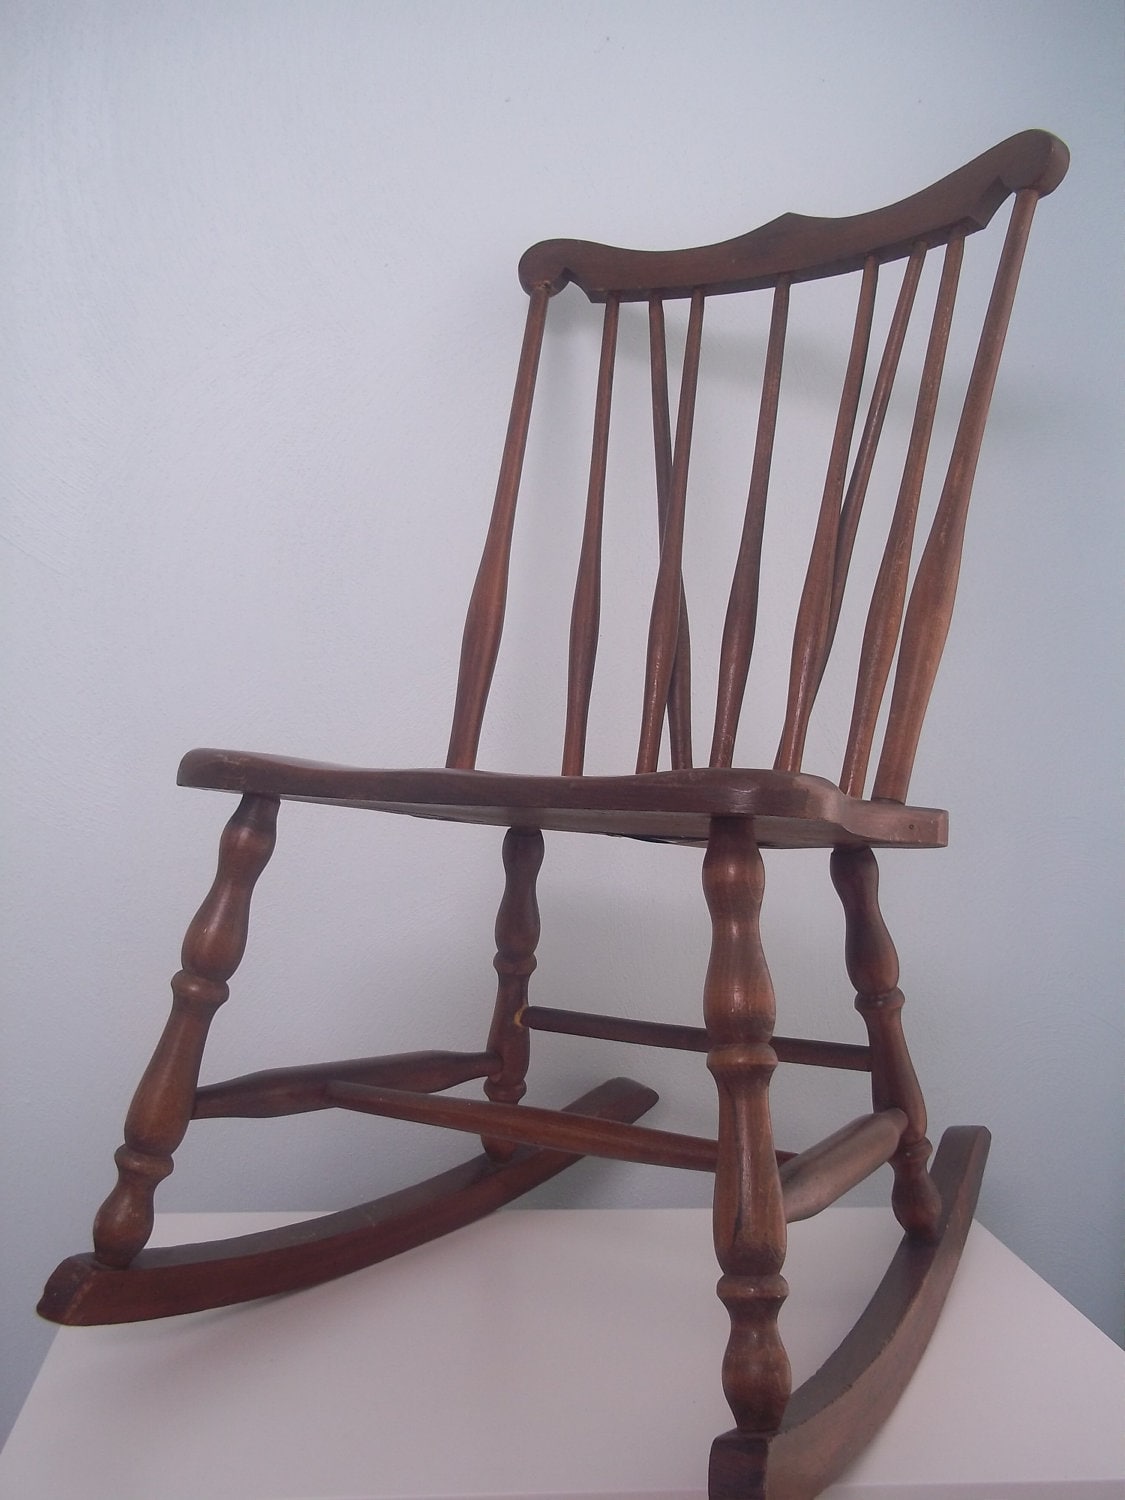 Items similar to Vintage antique Childs Rocking chair on Etsy